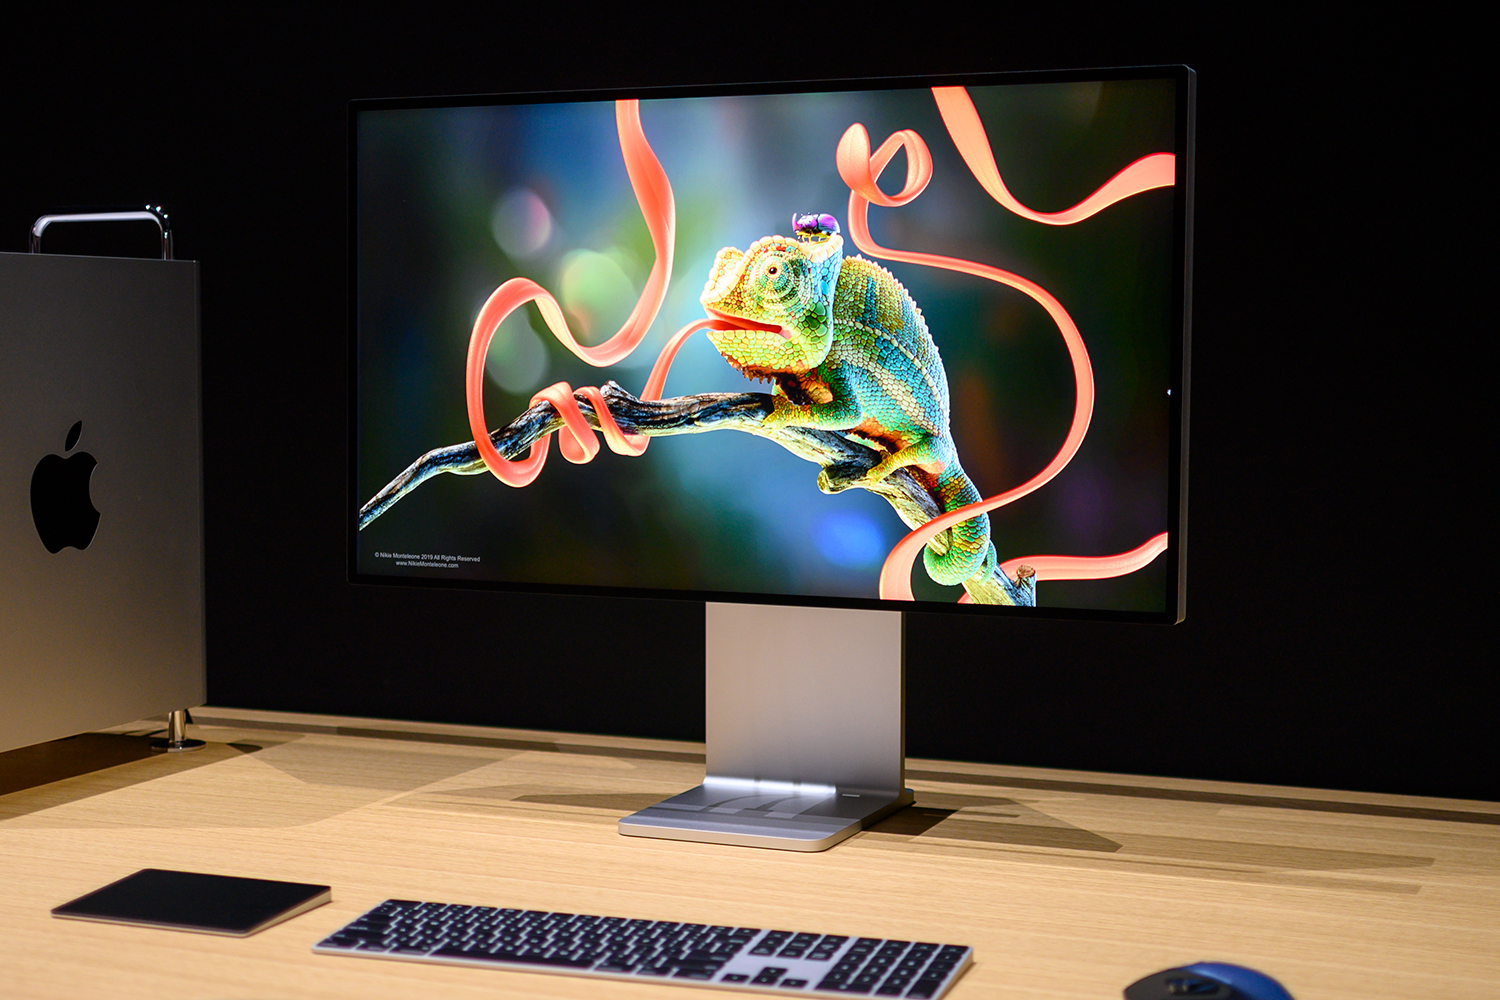 Apple's XDR technology debuted on the Pro Display XDR.